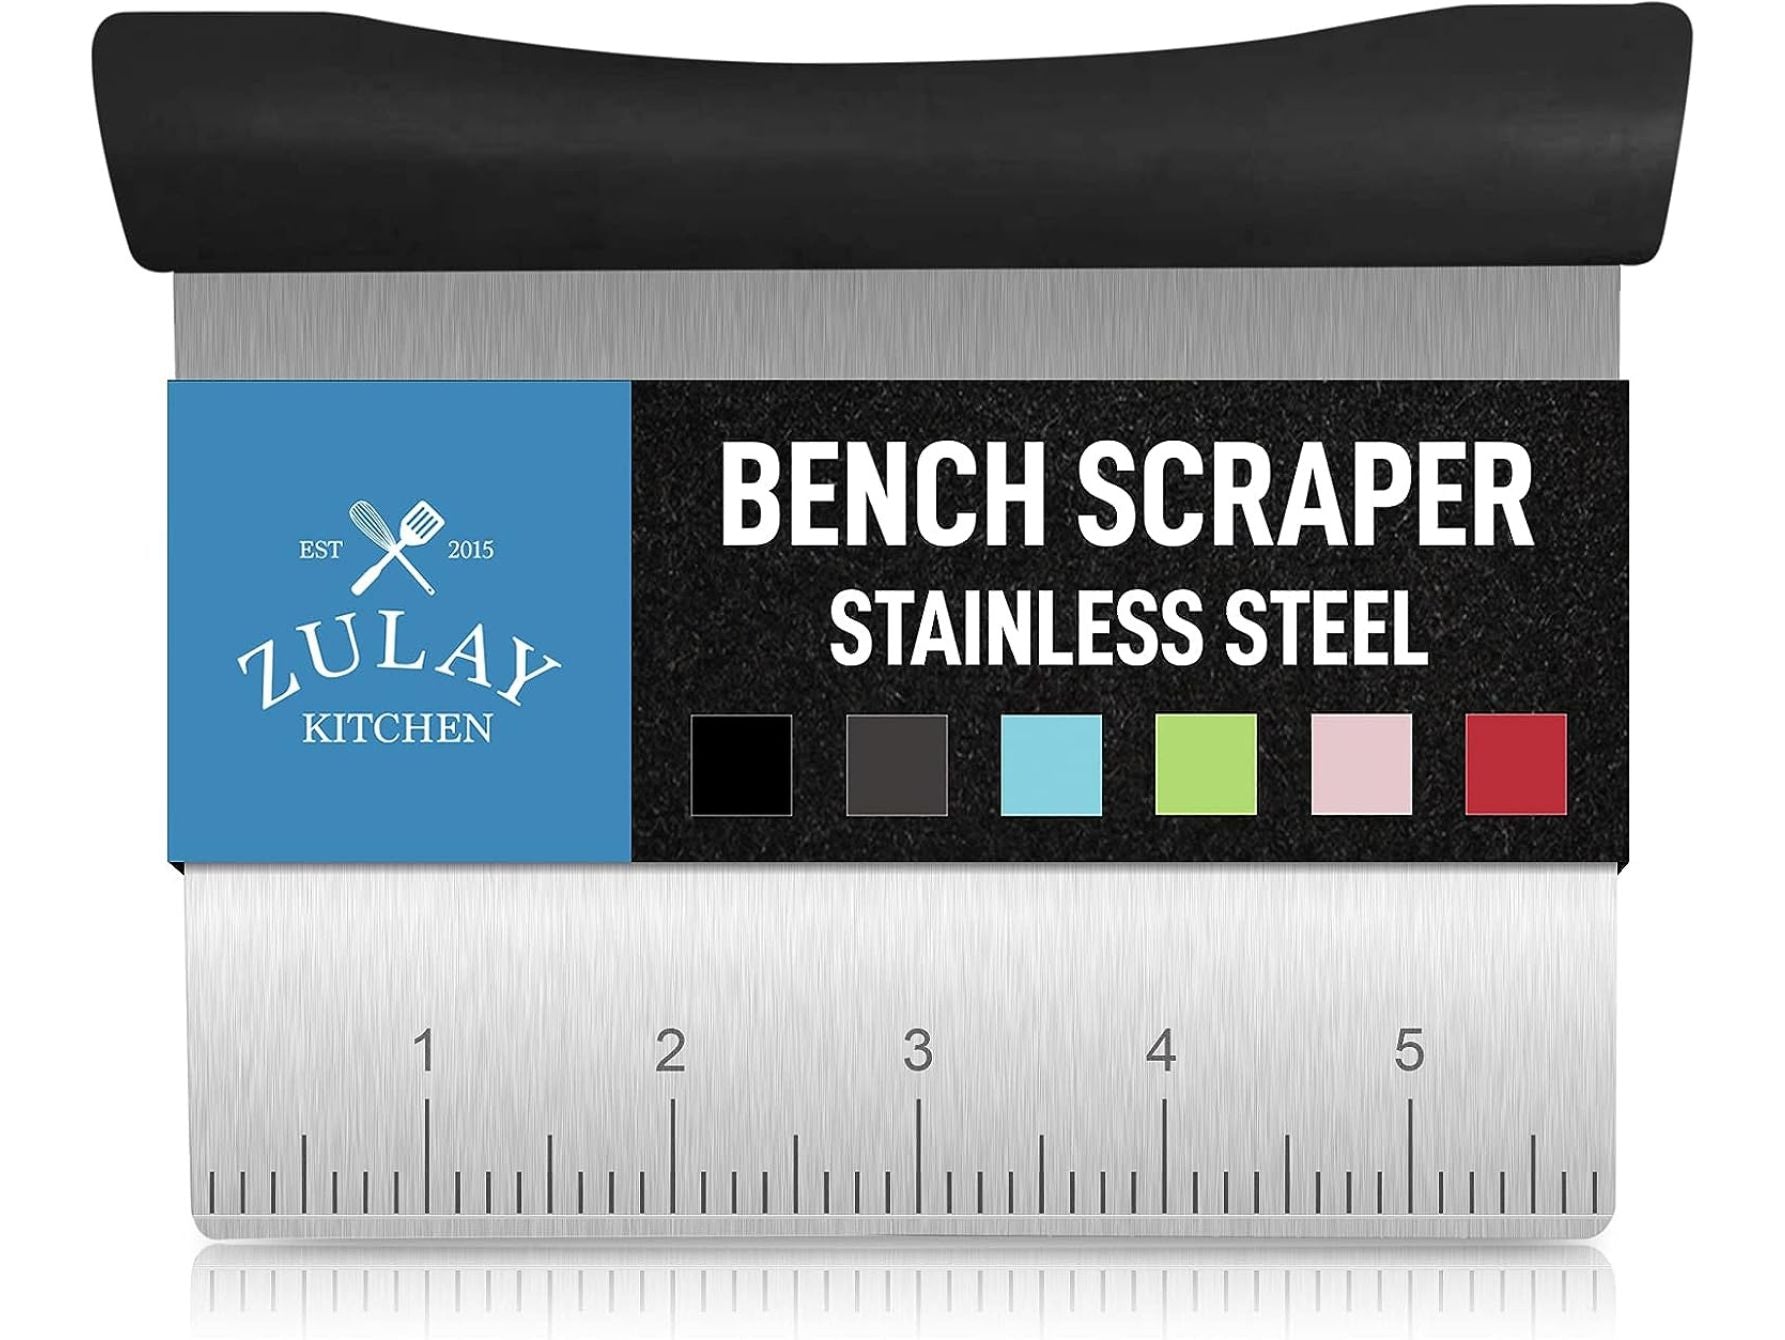 Why You Need a Bench Scraper - Versatile Kitchen Tool